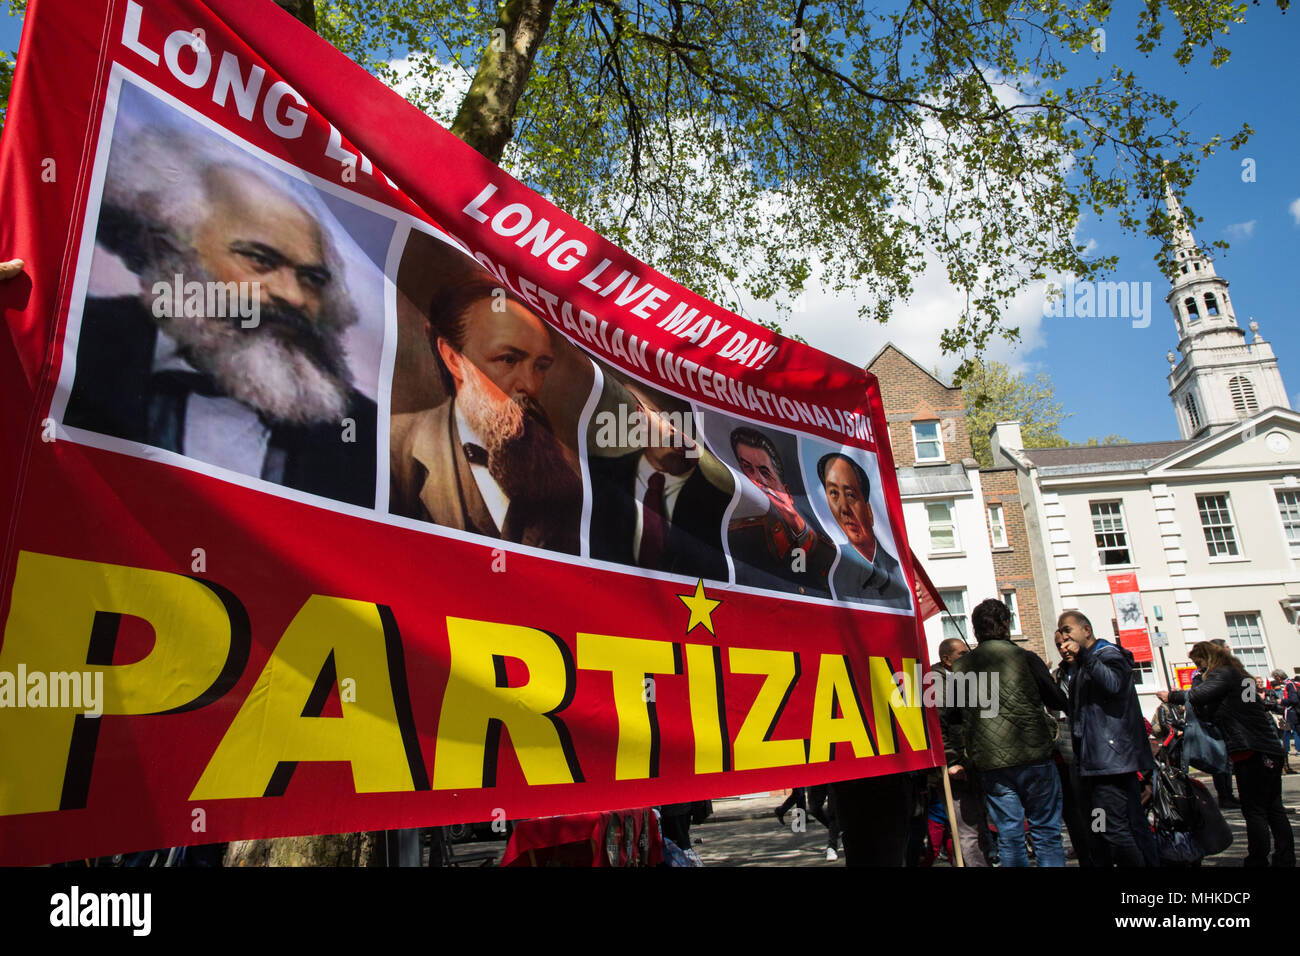 London, UK. 1st May, 2018. A Partizan banner among representatives of trade unions and socialist and communist parties from many different countries assembling on Clerkenwell Green to take part in the annual May Day march to mark International Workers' Day. Credit: Mark Kerrison/Alamy Live News Stock Photo